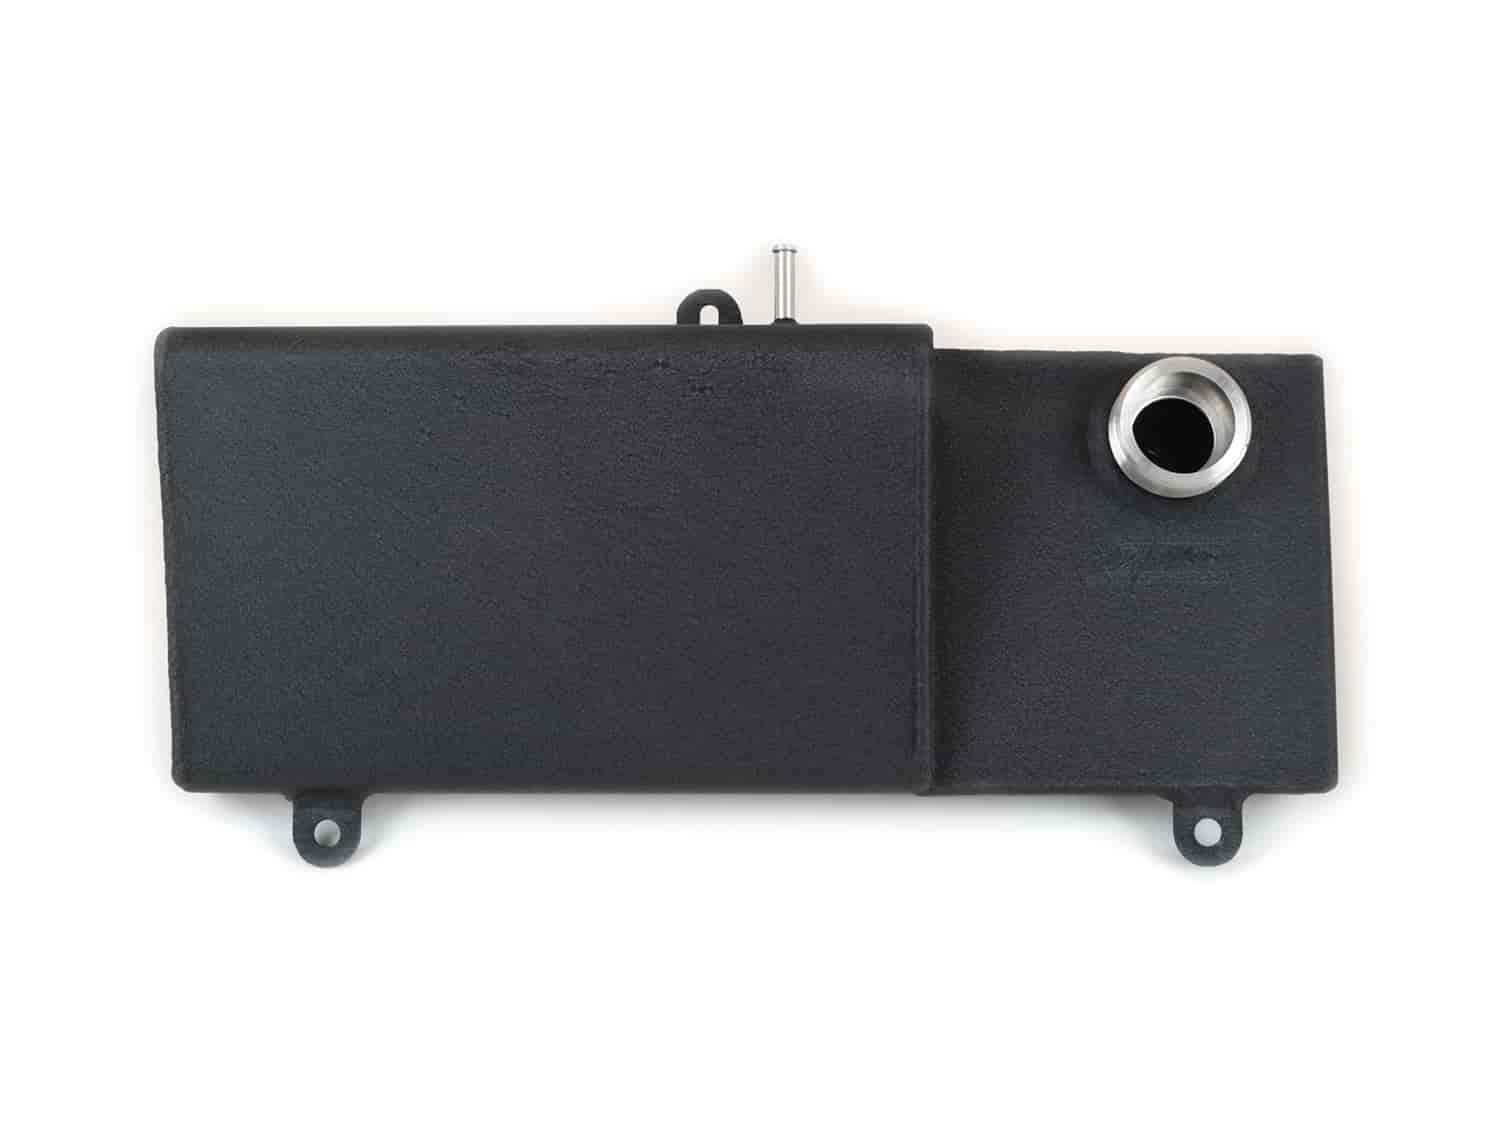 Coolant Expansion Fill Tank 1996-2004 Ford Mustang V8